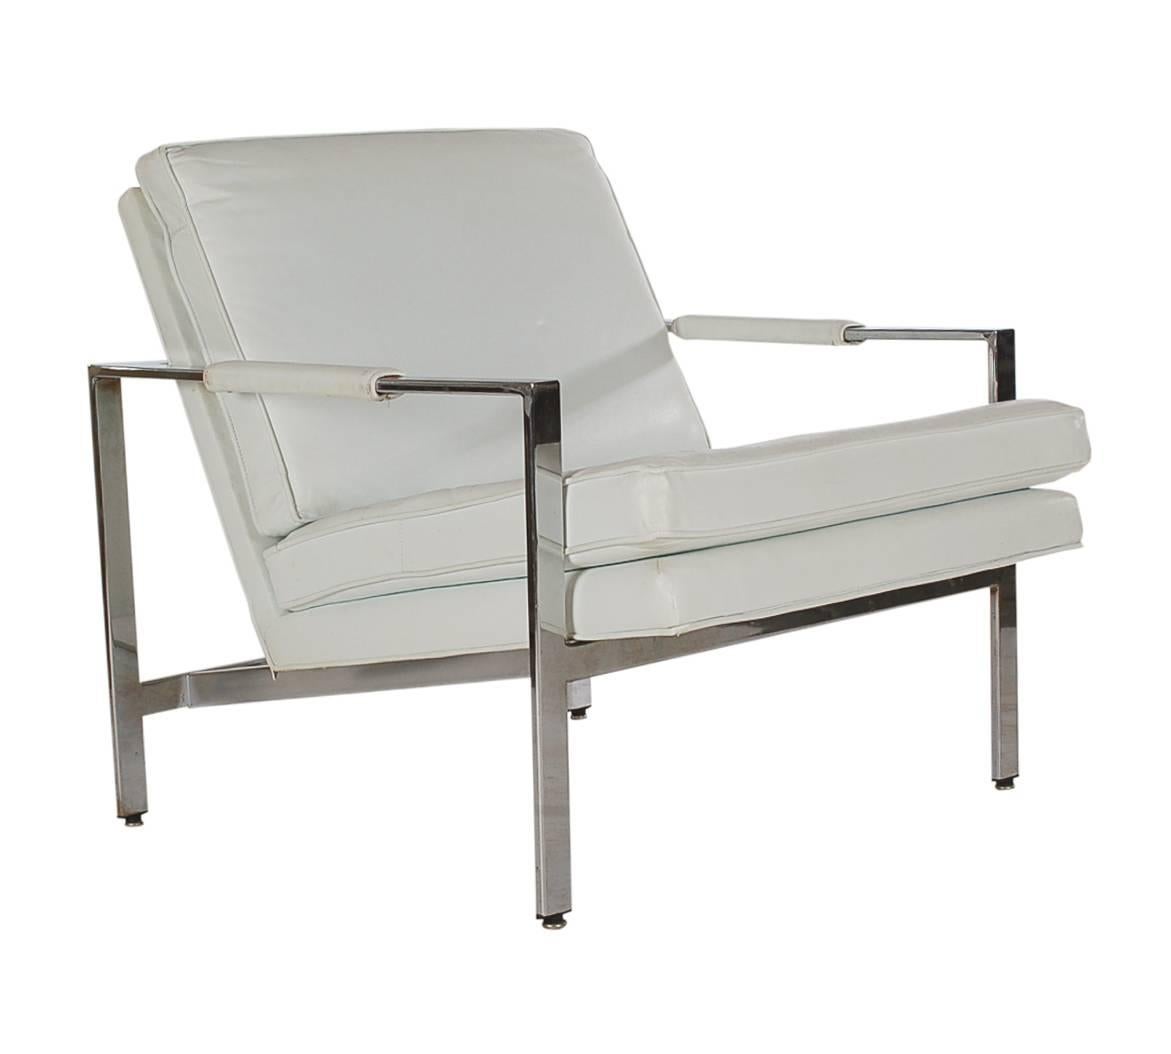 A stunning matching pair of flat bar lounge chairs designed by Milo Baughman and produced by Thayer Coggin. These feature chrome flat bar construction and white Naugahyde cushions. Price includes the pair as shown.